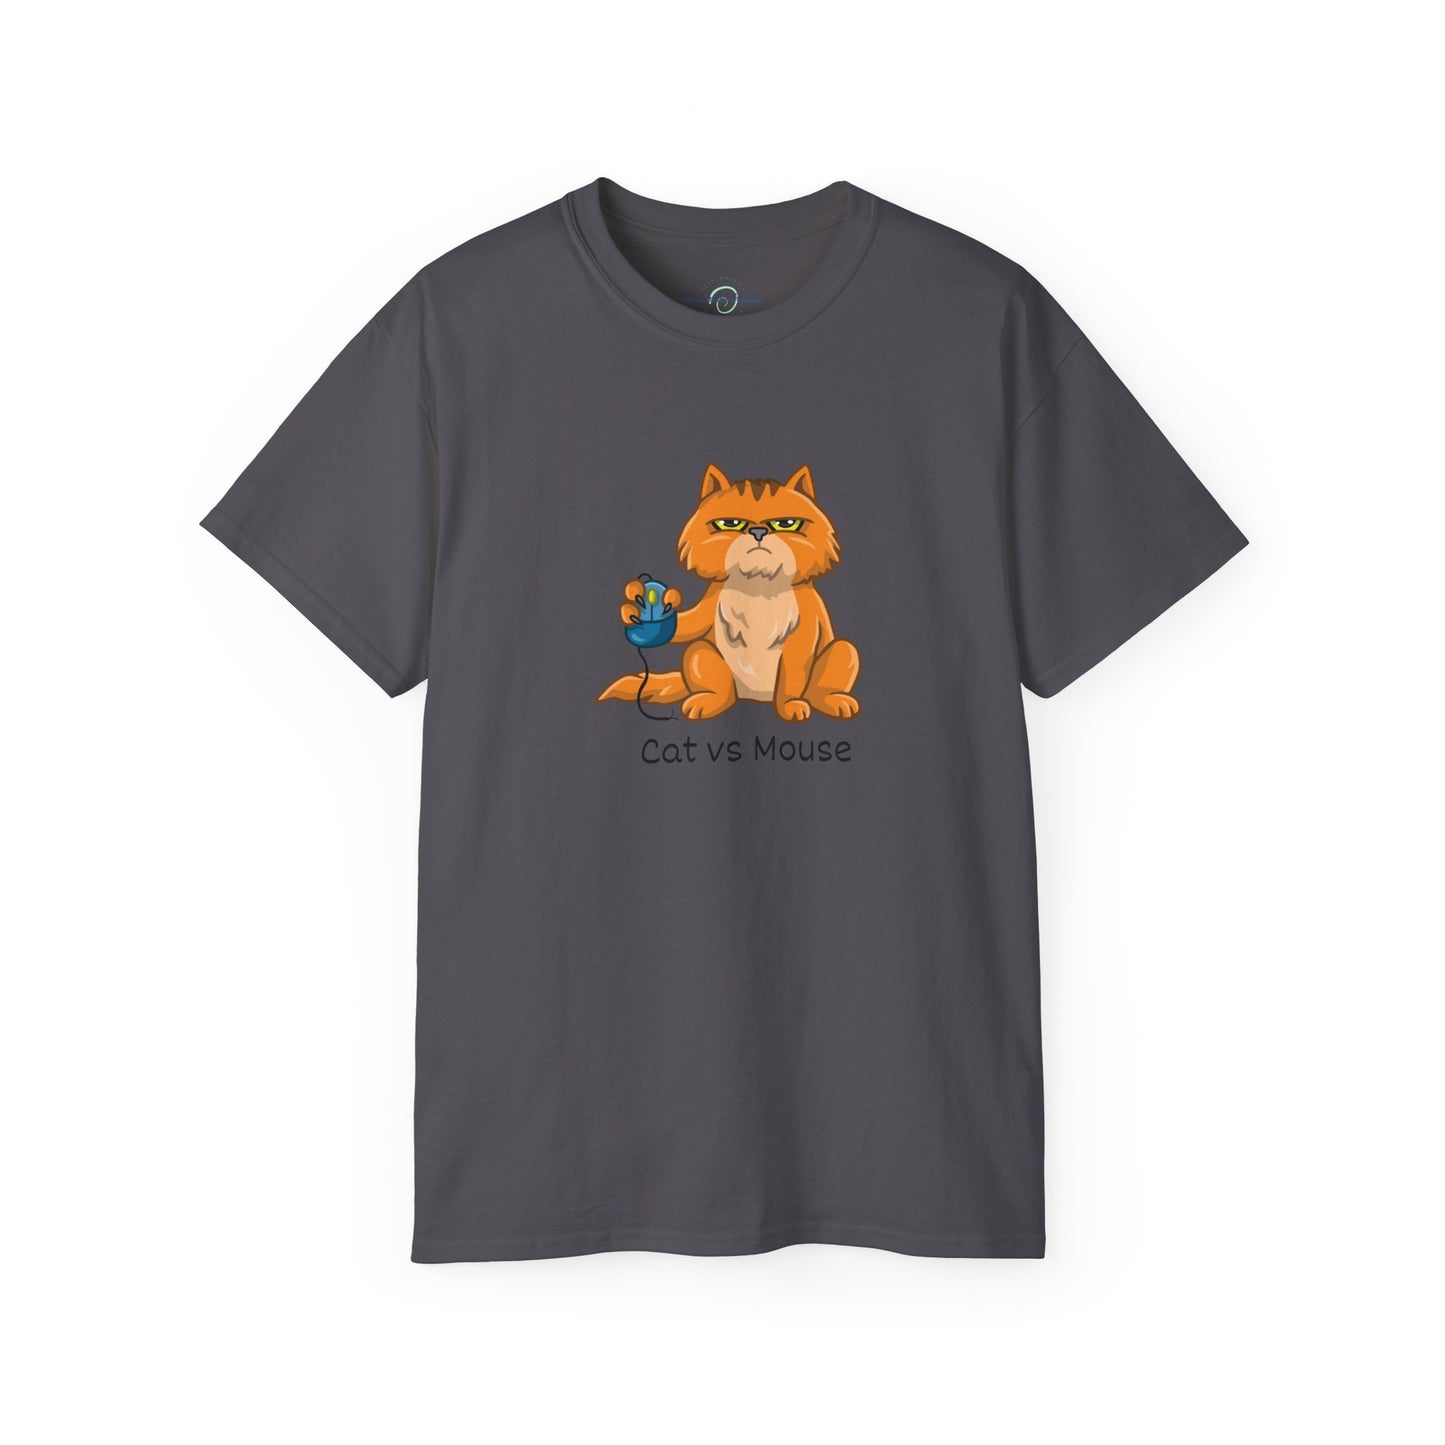 'Cat vs Mouse' Ultra Cotton Tee